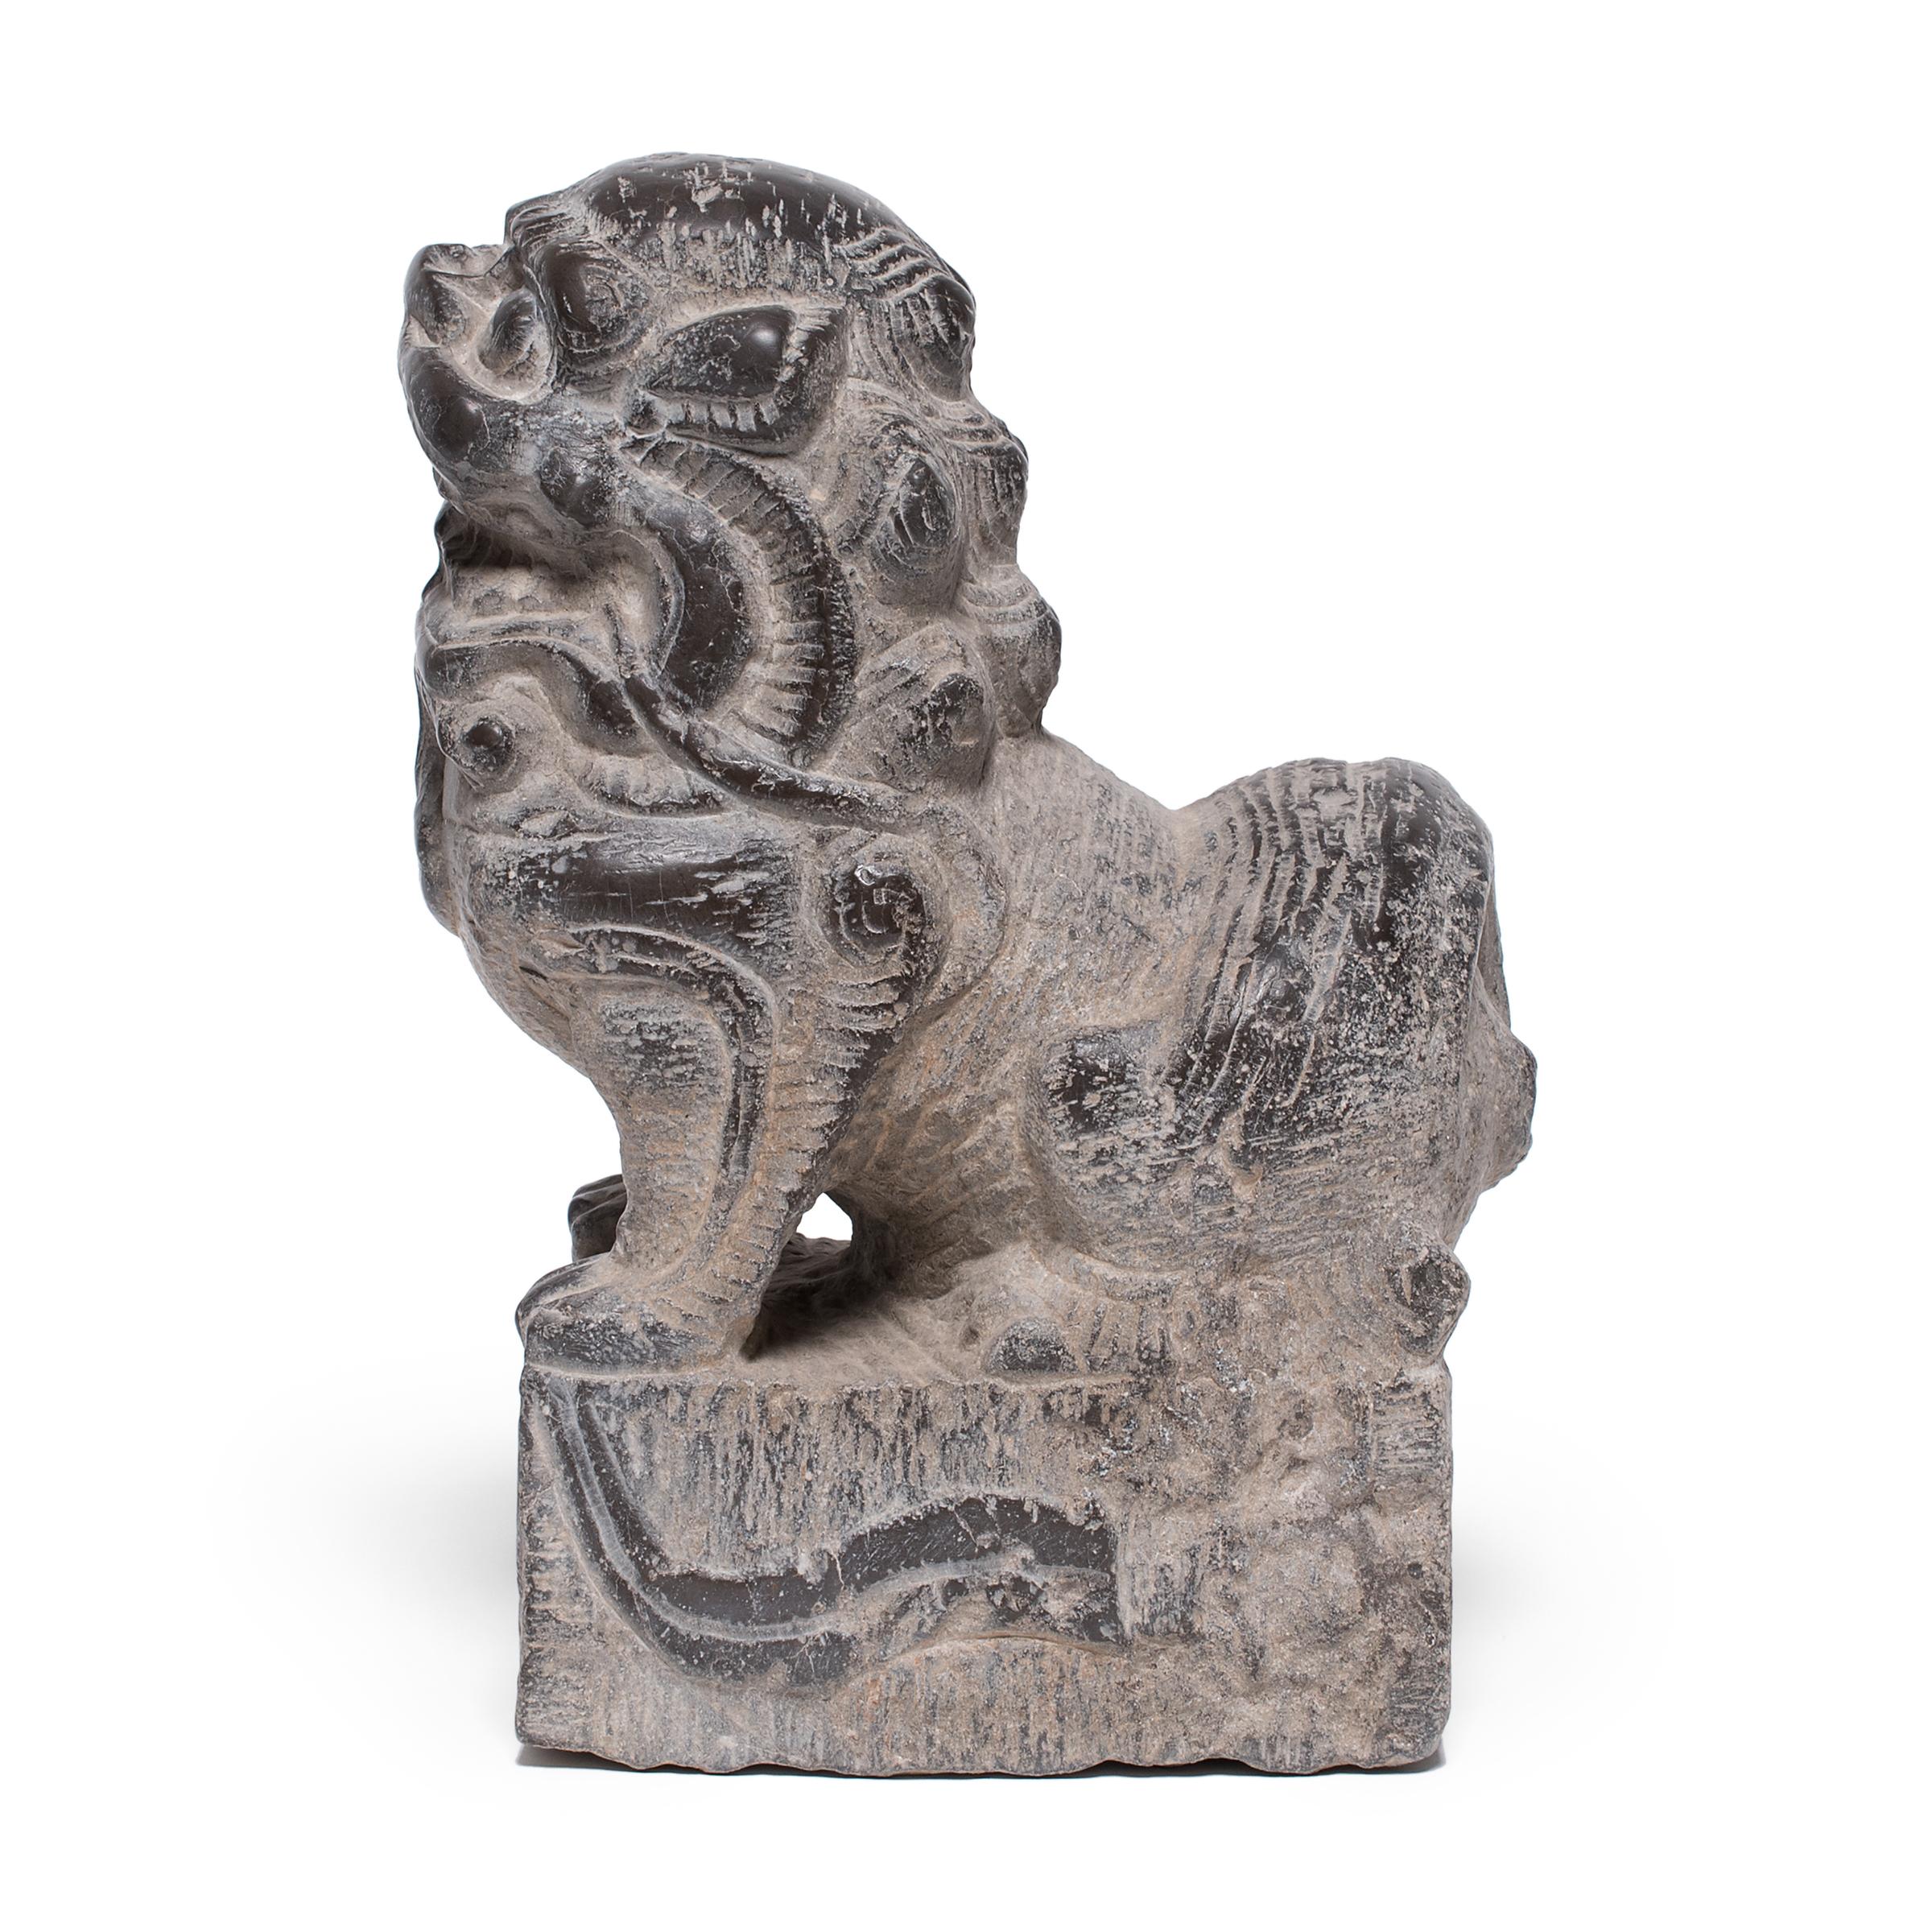 Hand-carved from a single block of limestone, this stone fu dog sits at attention as a watchful guardian of the home. He exudes a remarkable sense of life and energy - crouched on all fours with curly hair and a lively expression. A bell hanging